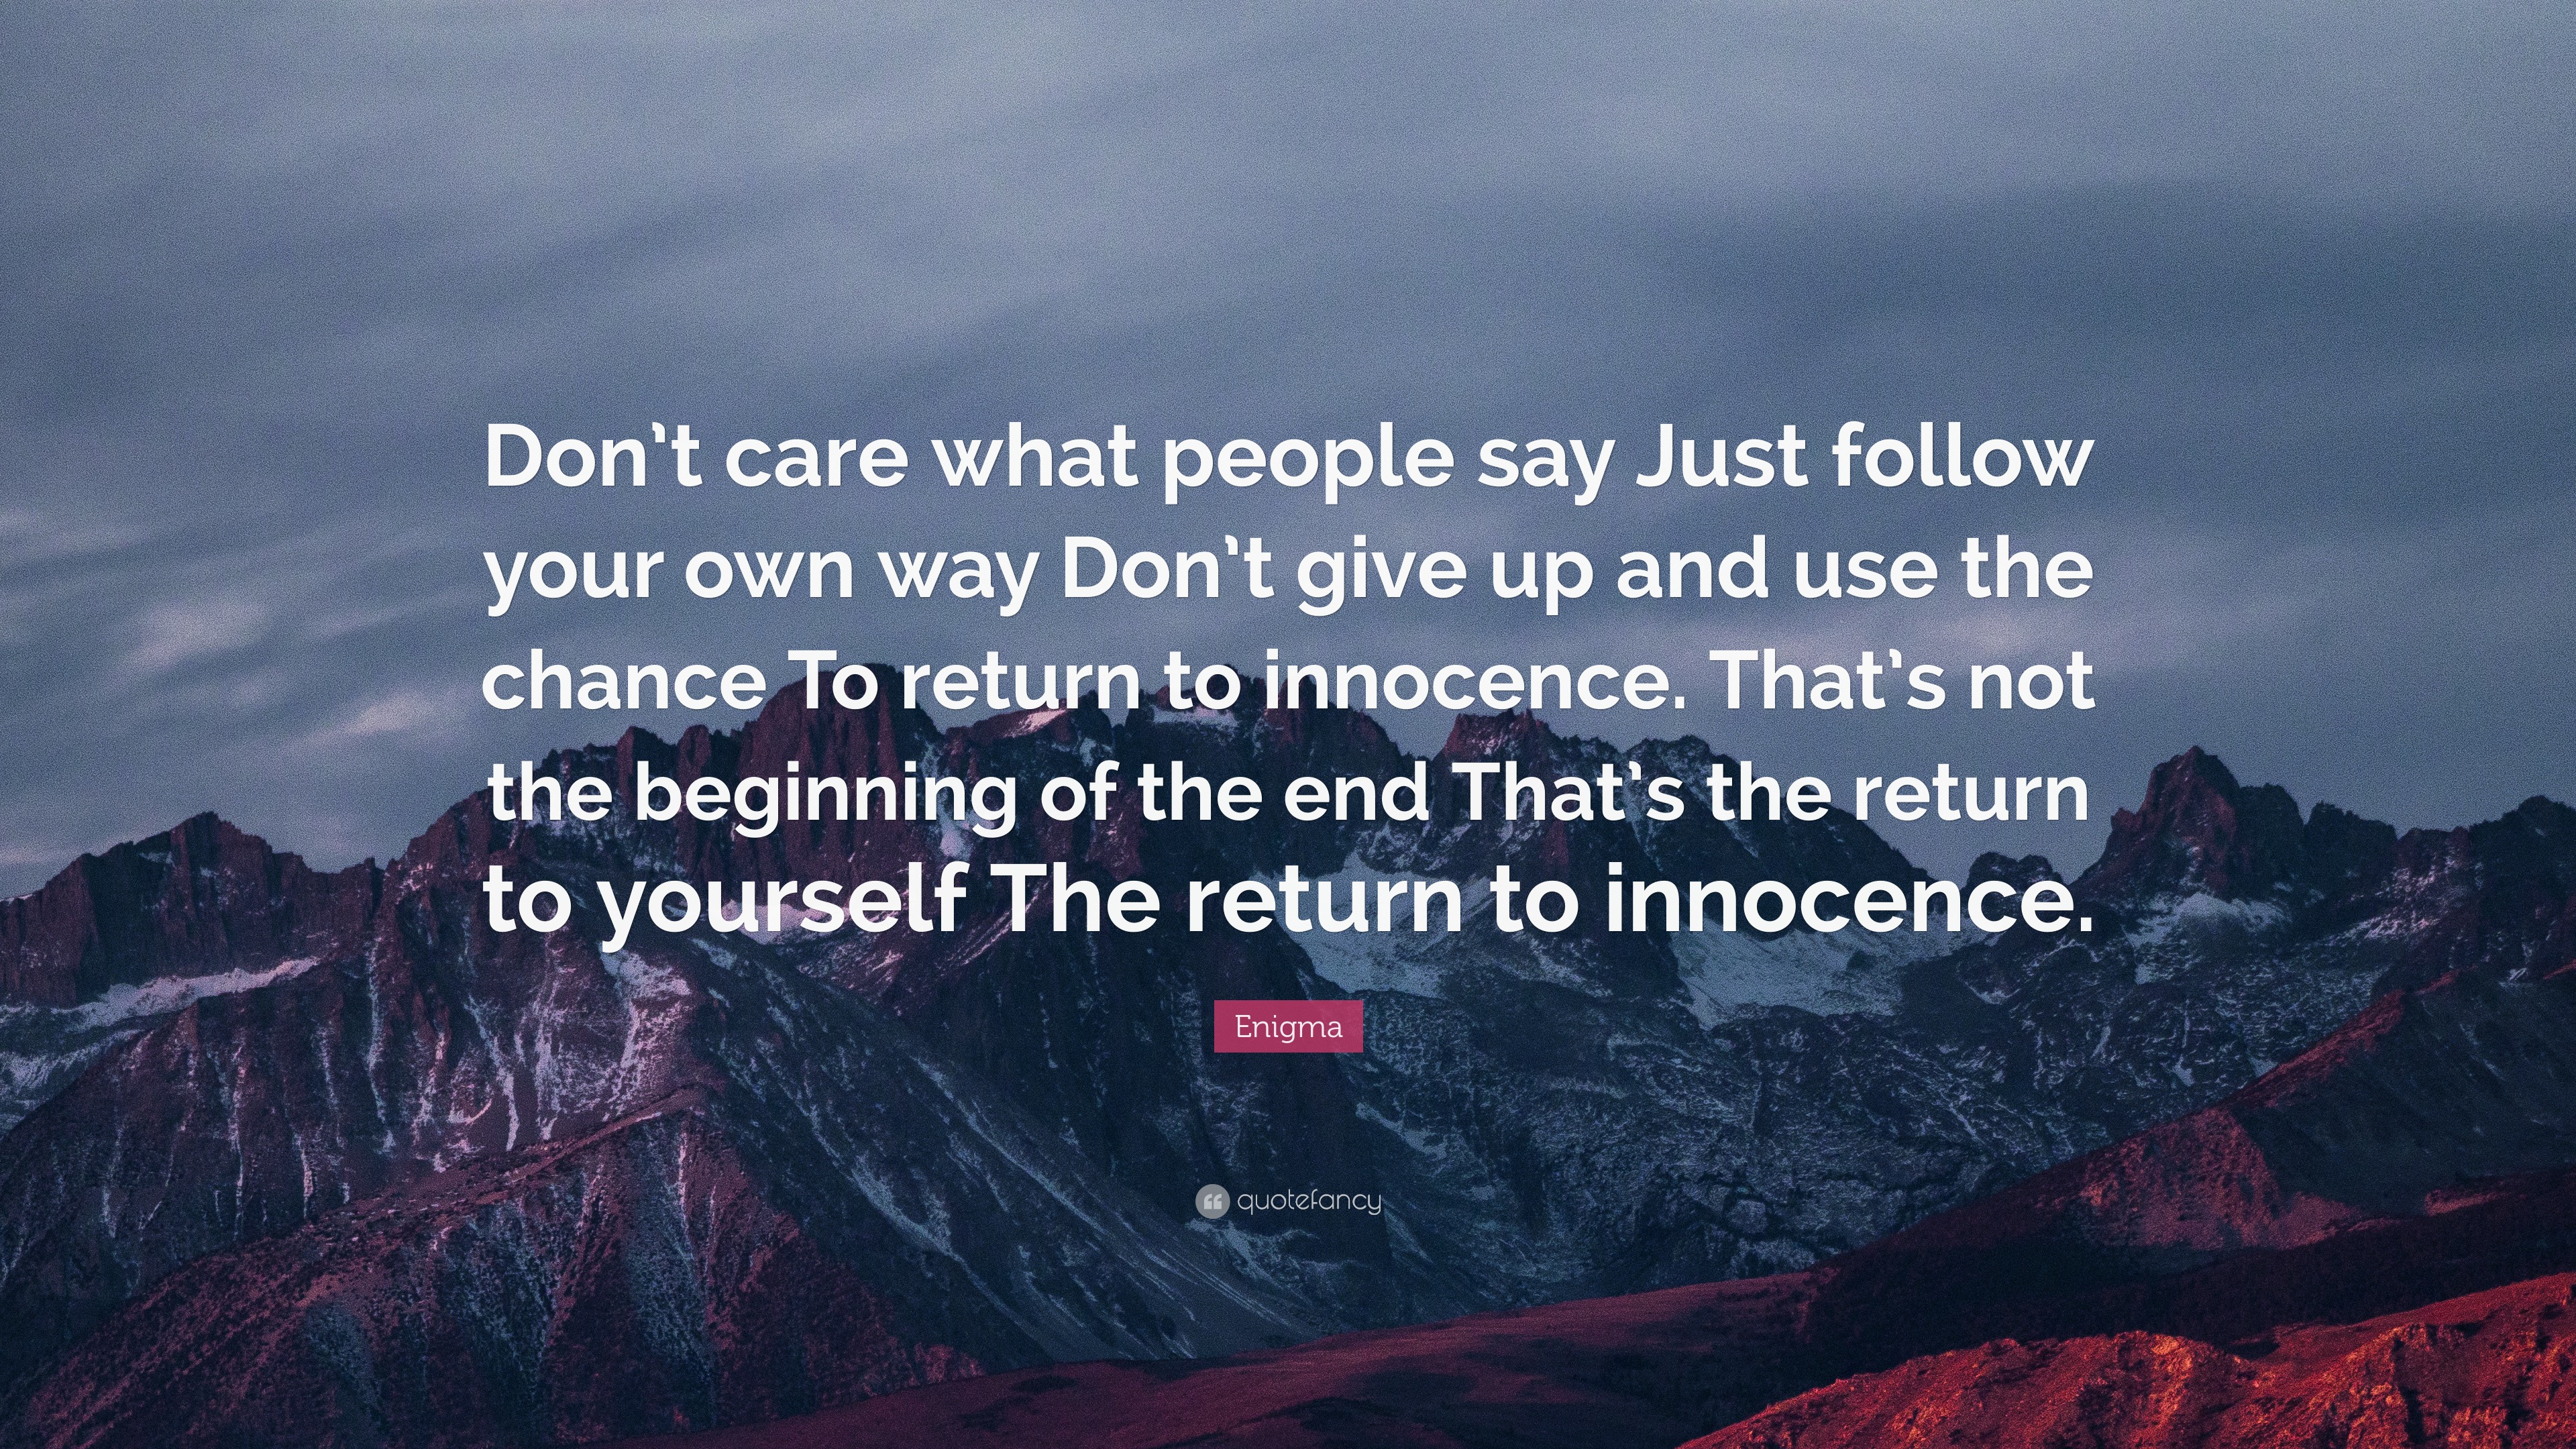 Enigma Quote: “Don’t care what people say Just follow your own way Don ...